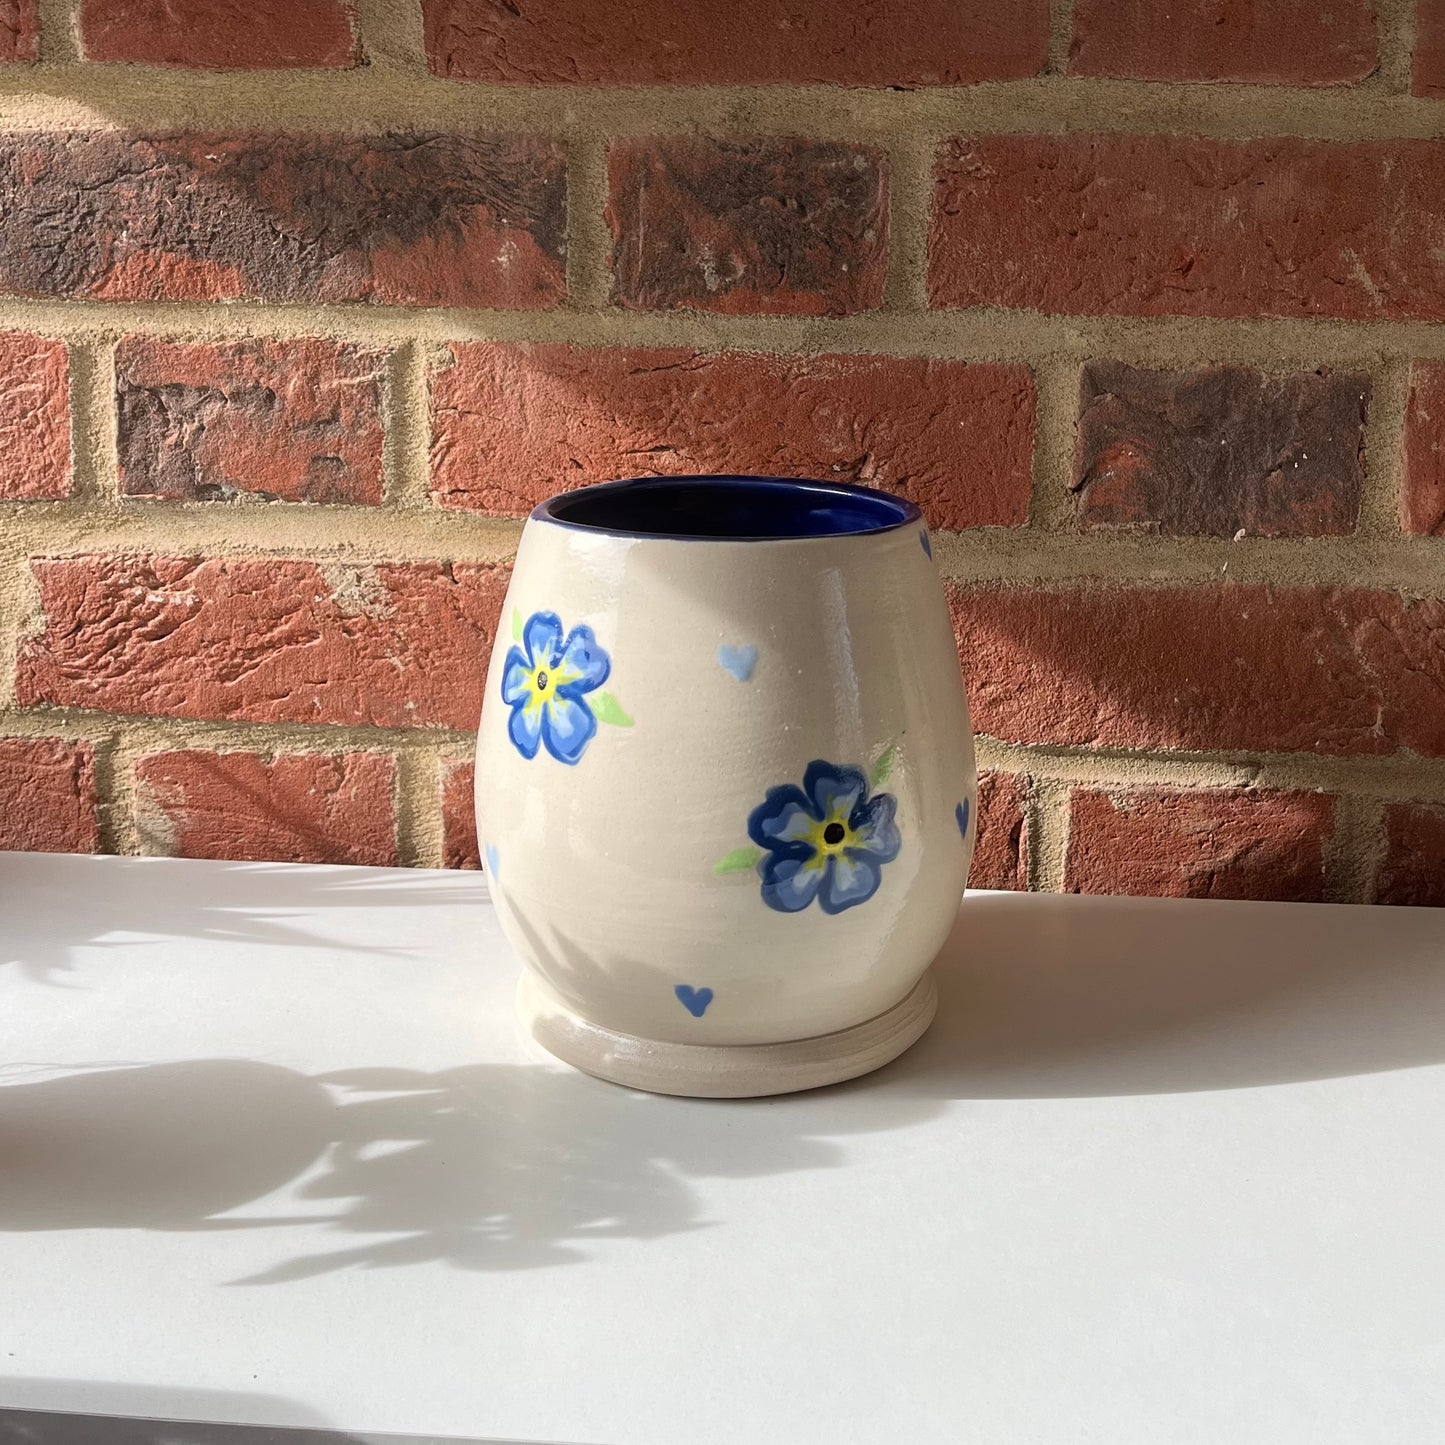 rounded forget-me-not planter